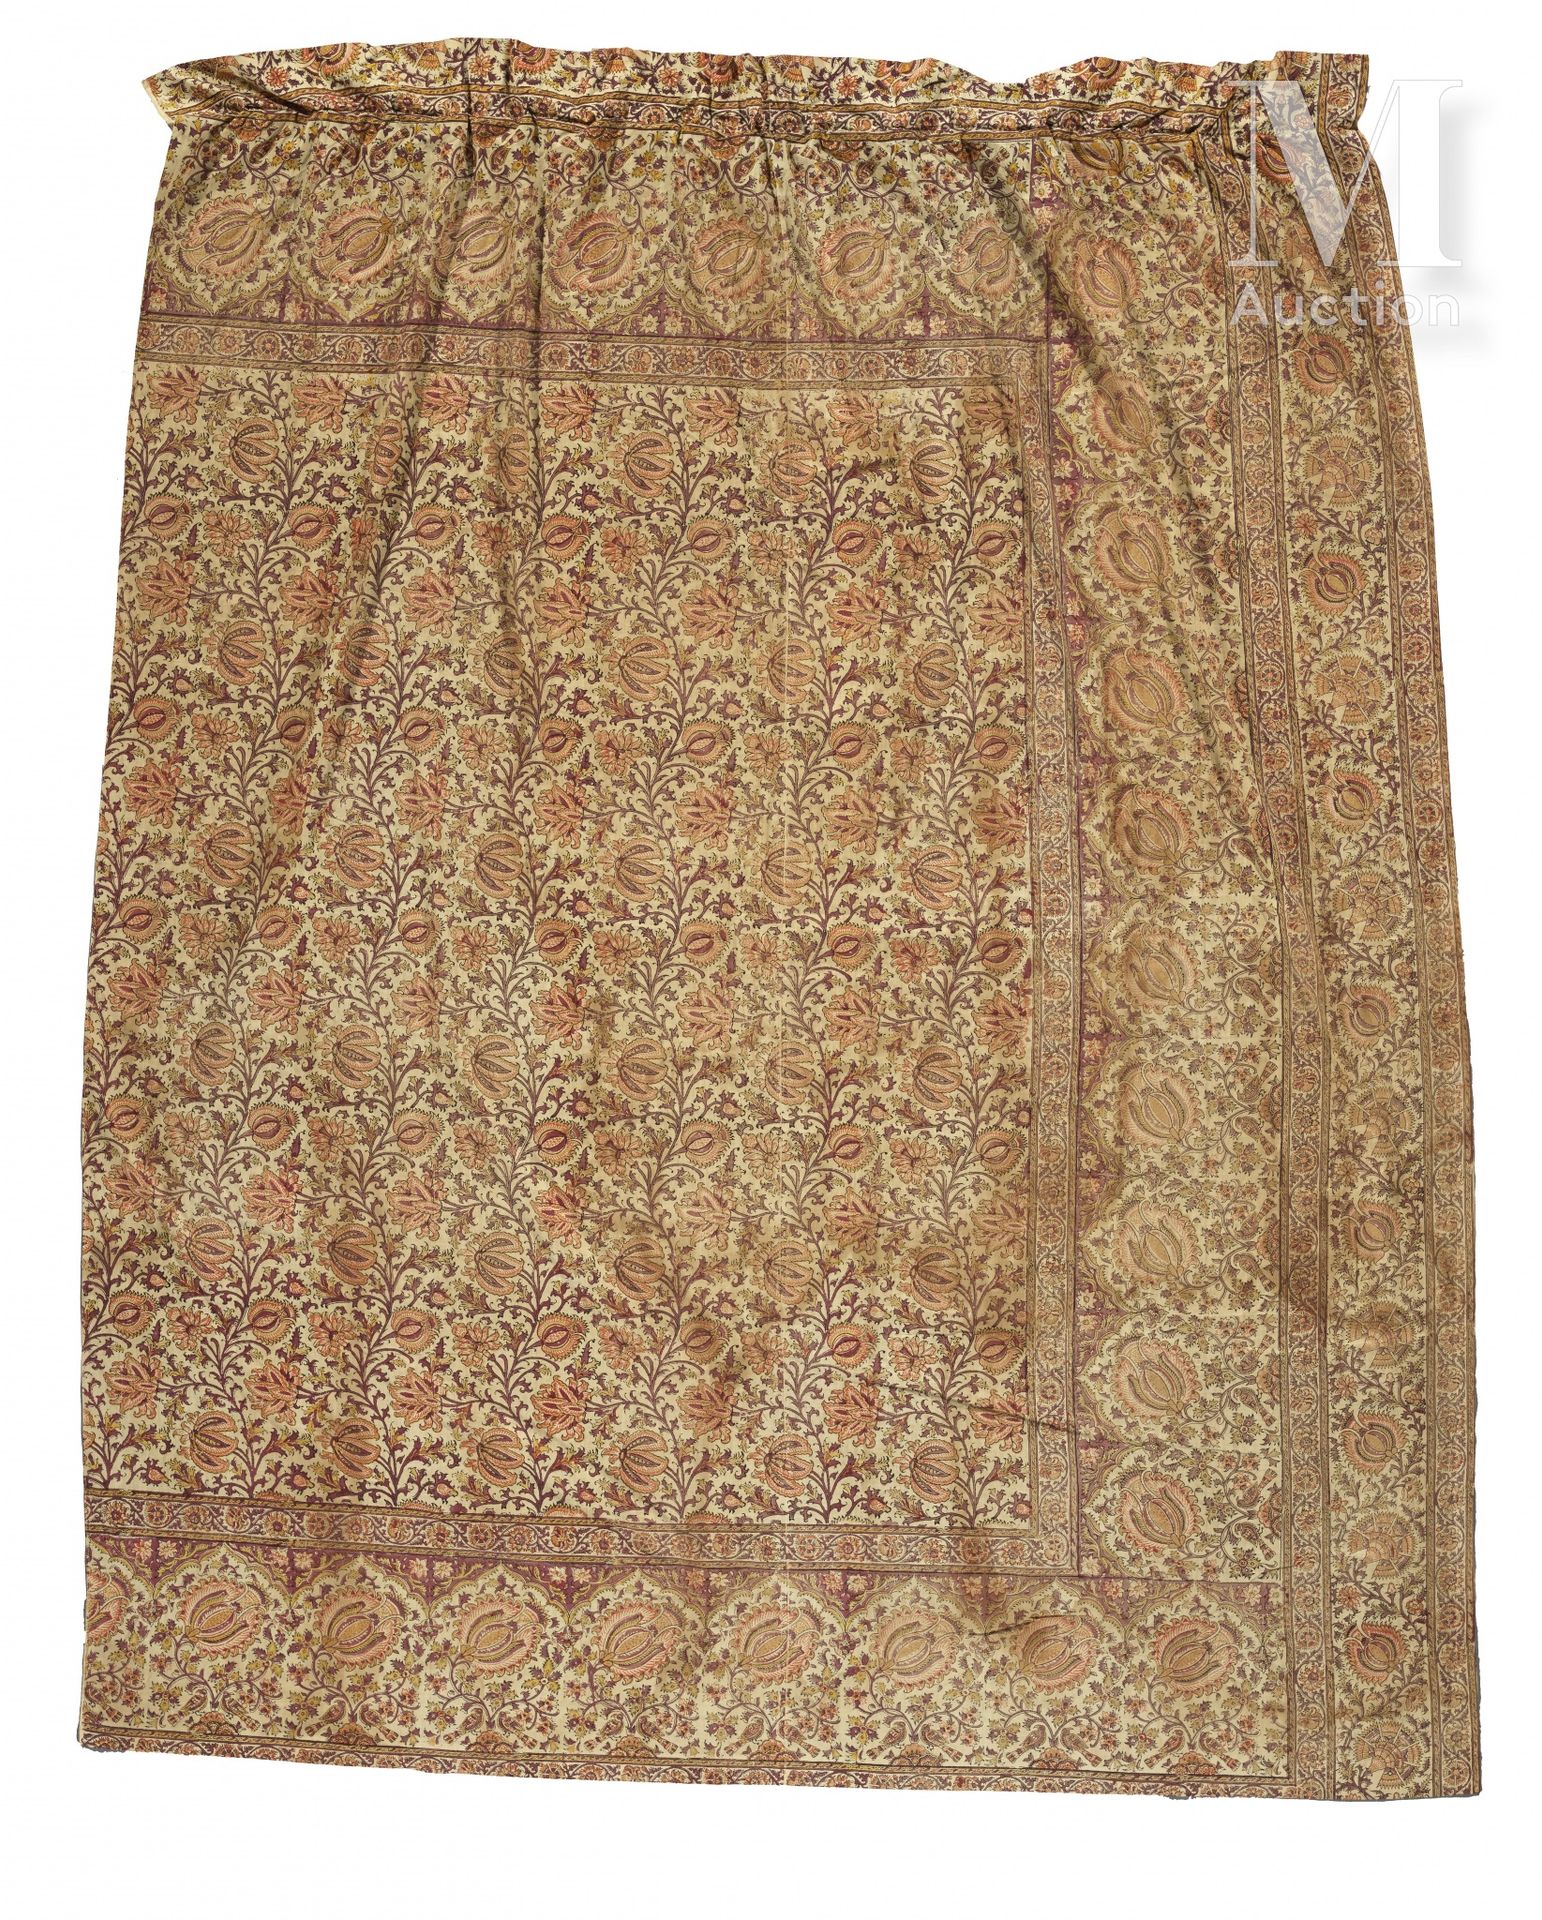 Null Indian - Kalamkar India, 19th century Hand-printed cotton hanging with flor&hellip;